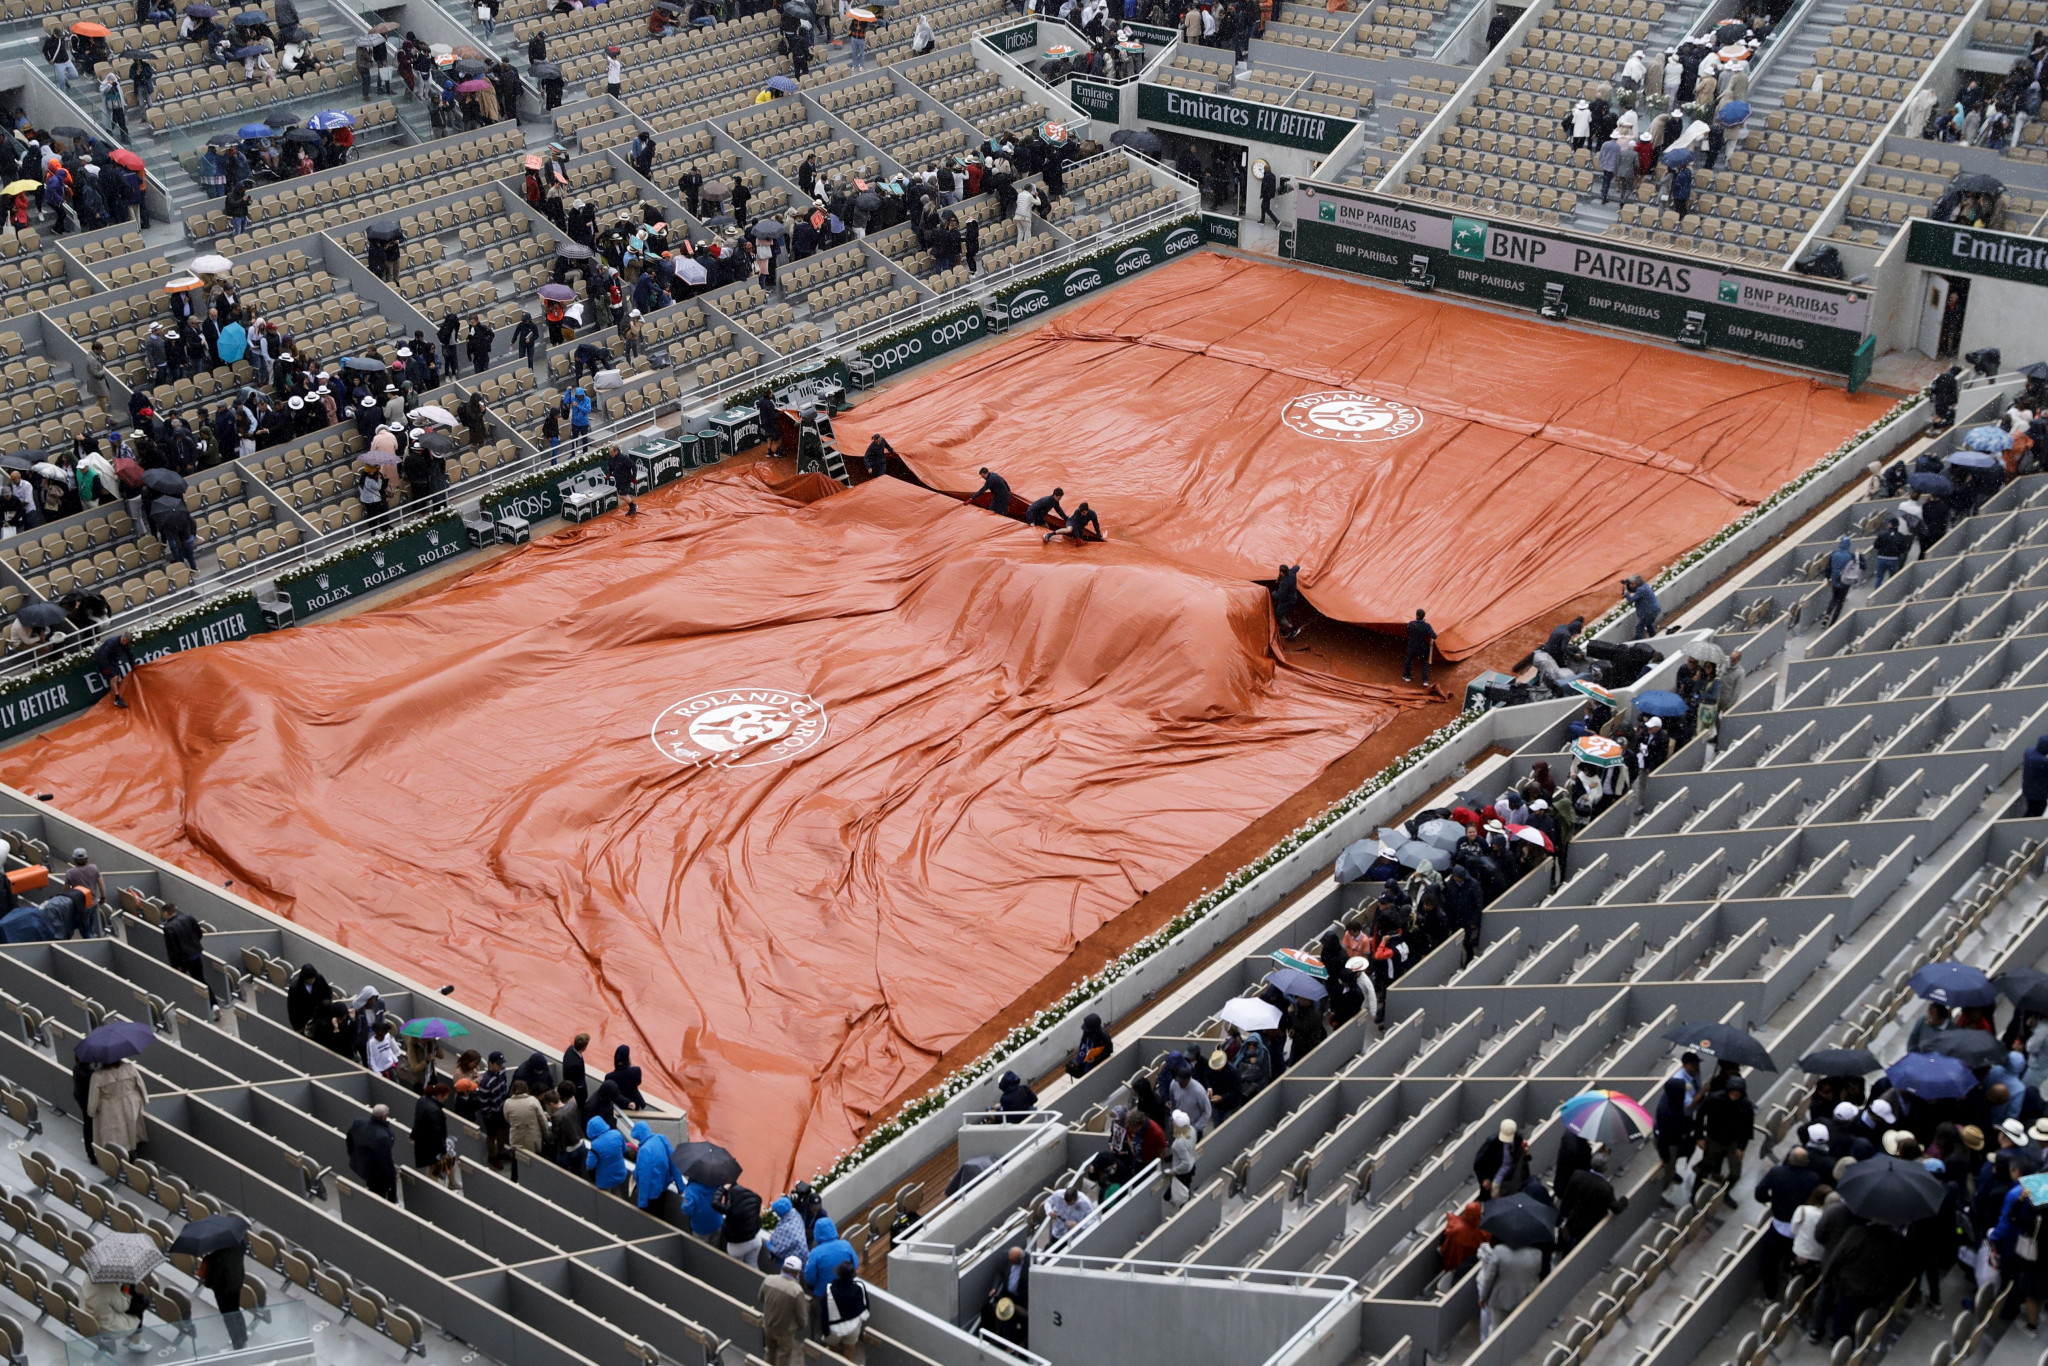 Ground staff pull covers across the court surface as rain delays the men's semi-final between Austria's Dominic Thiem and Novak Djokovic of Serbia ©Getty Images